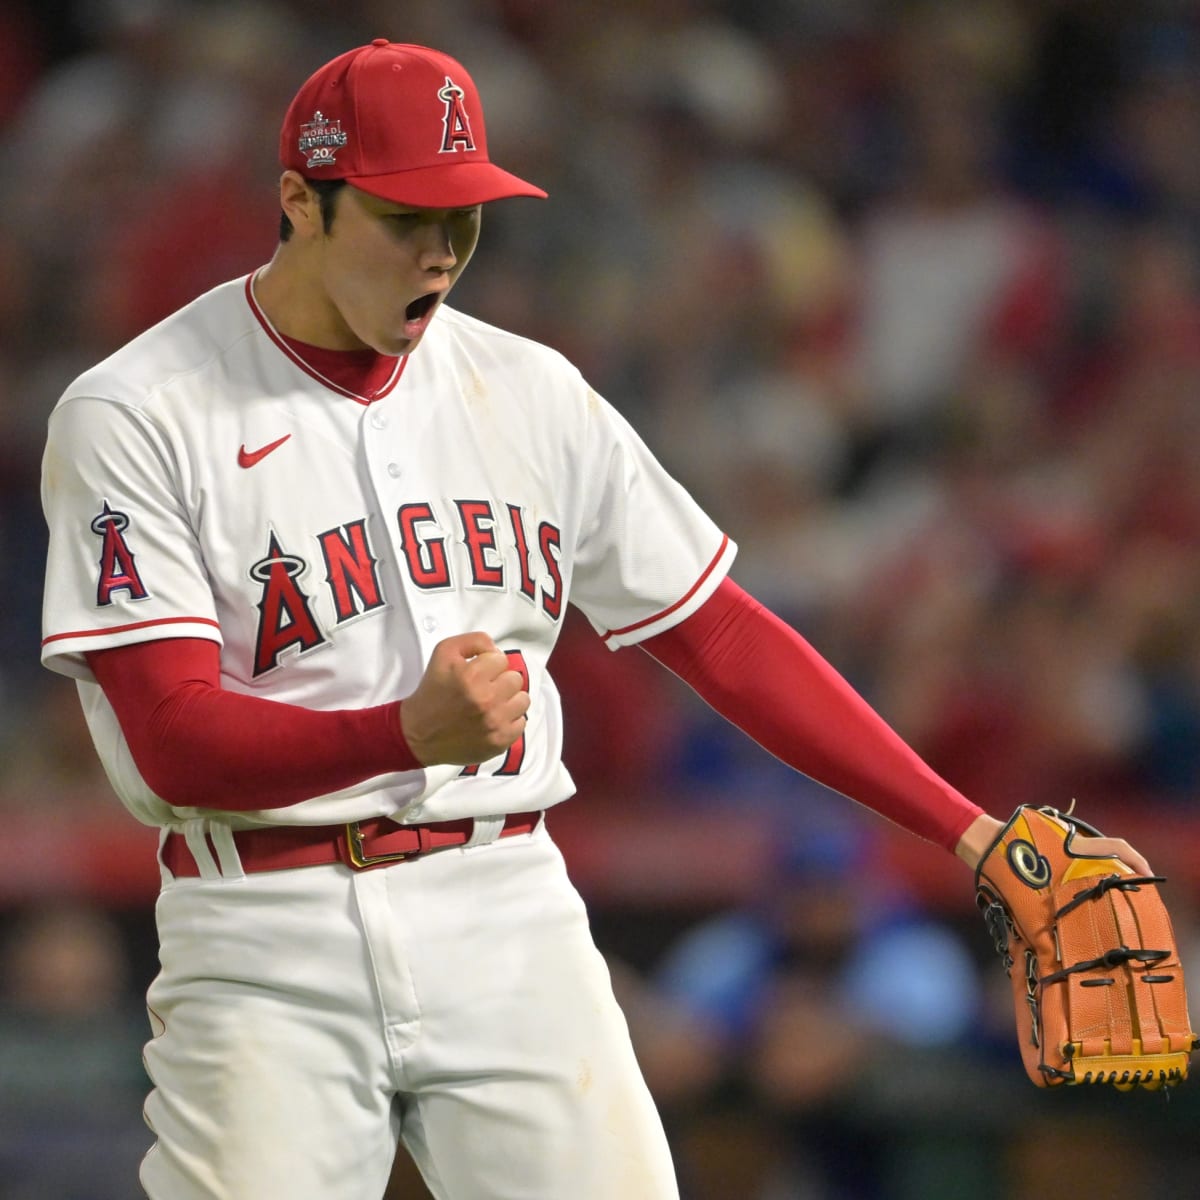 Shohei Ohtani hits two homers, strikes out 10 and adds to Angels